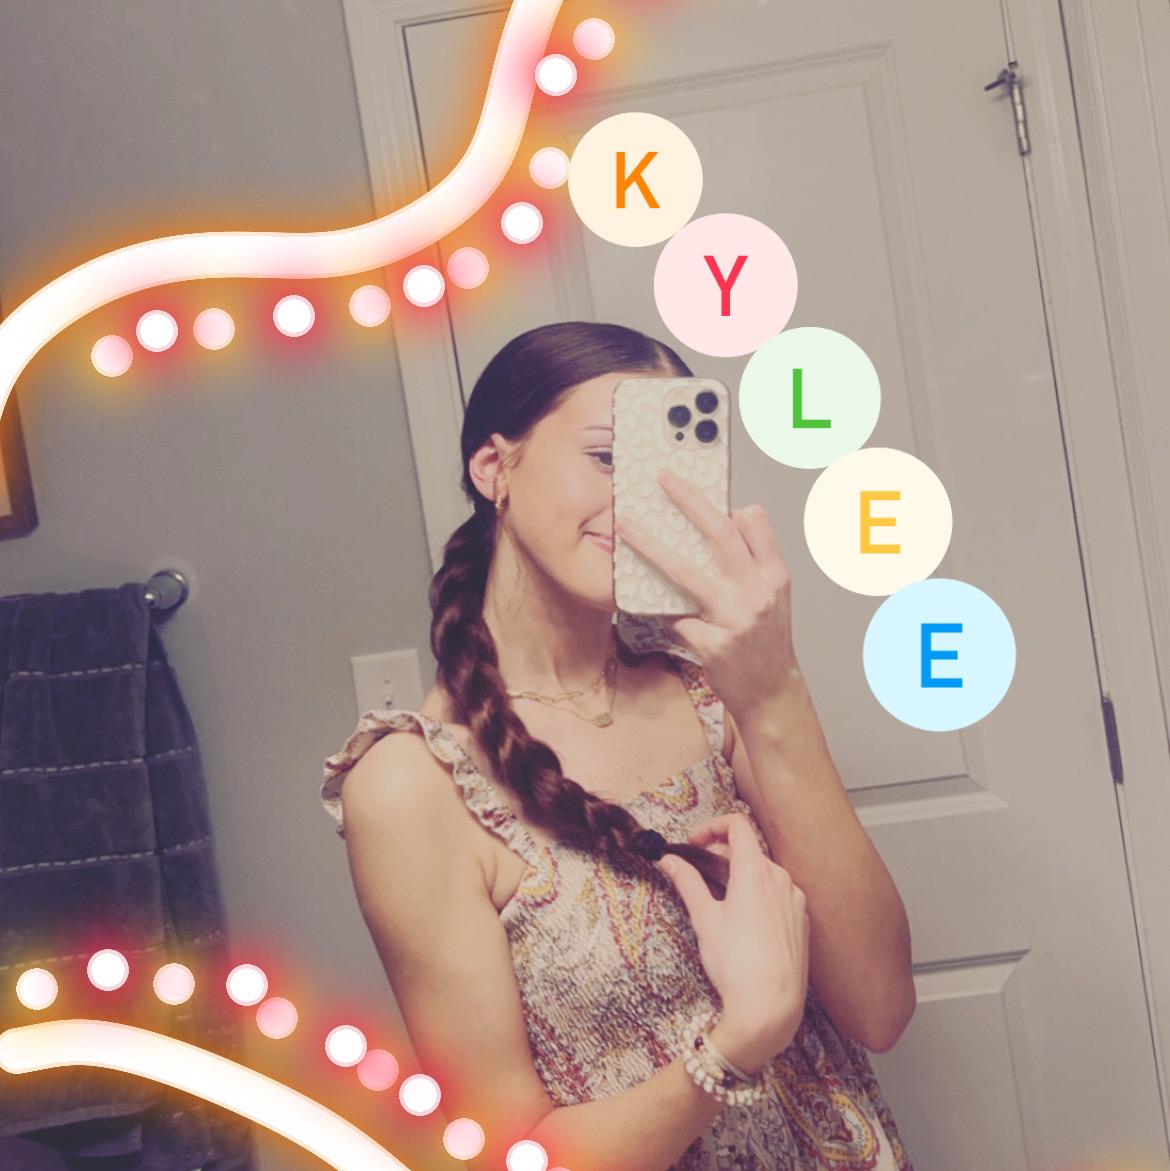 kylee 💌🪩🌈🎀😇's images